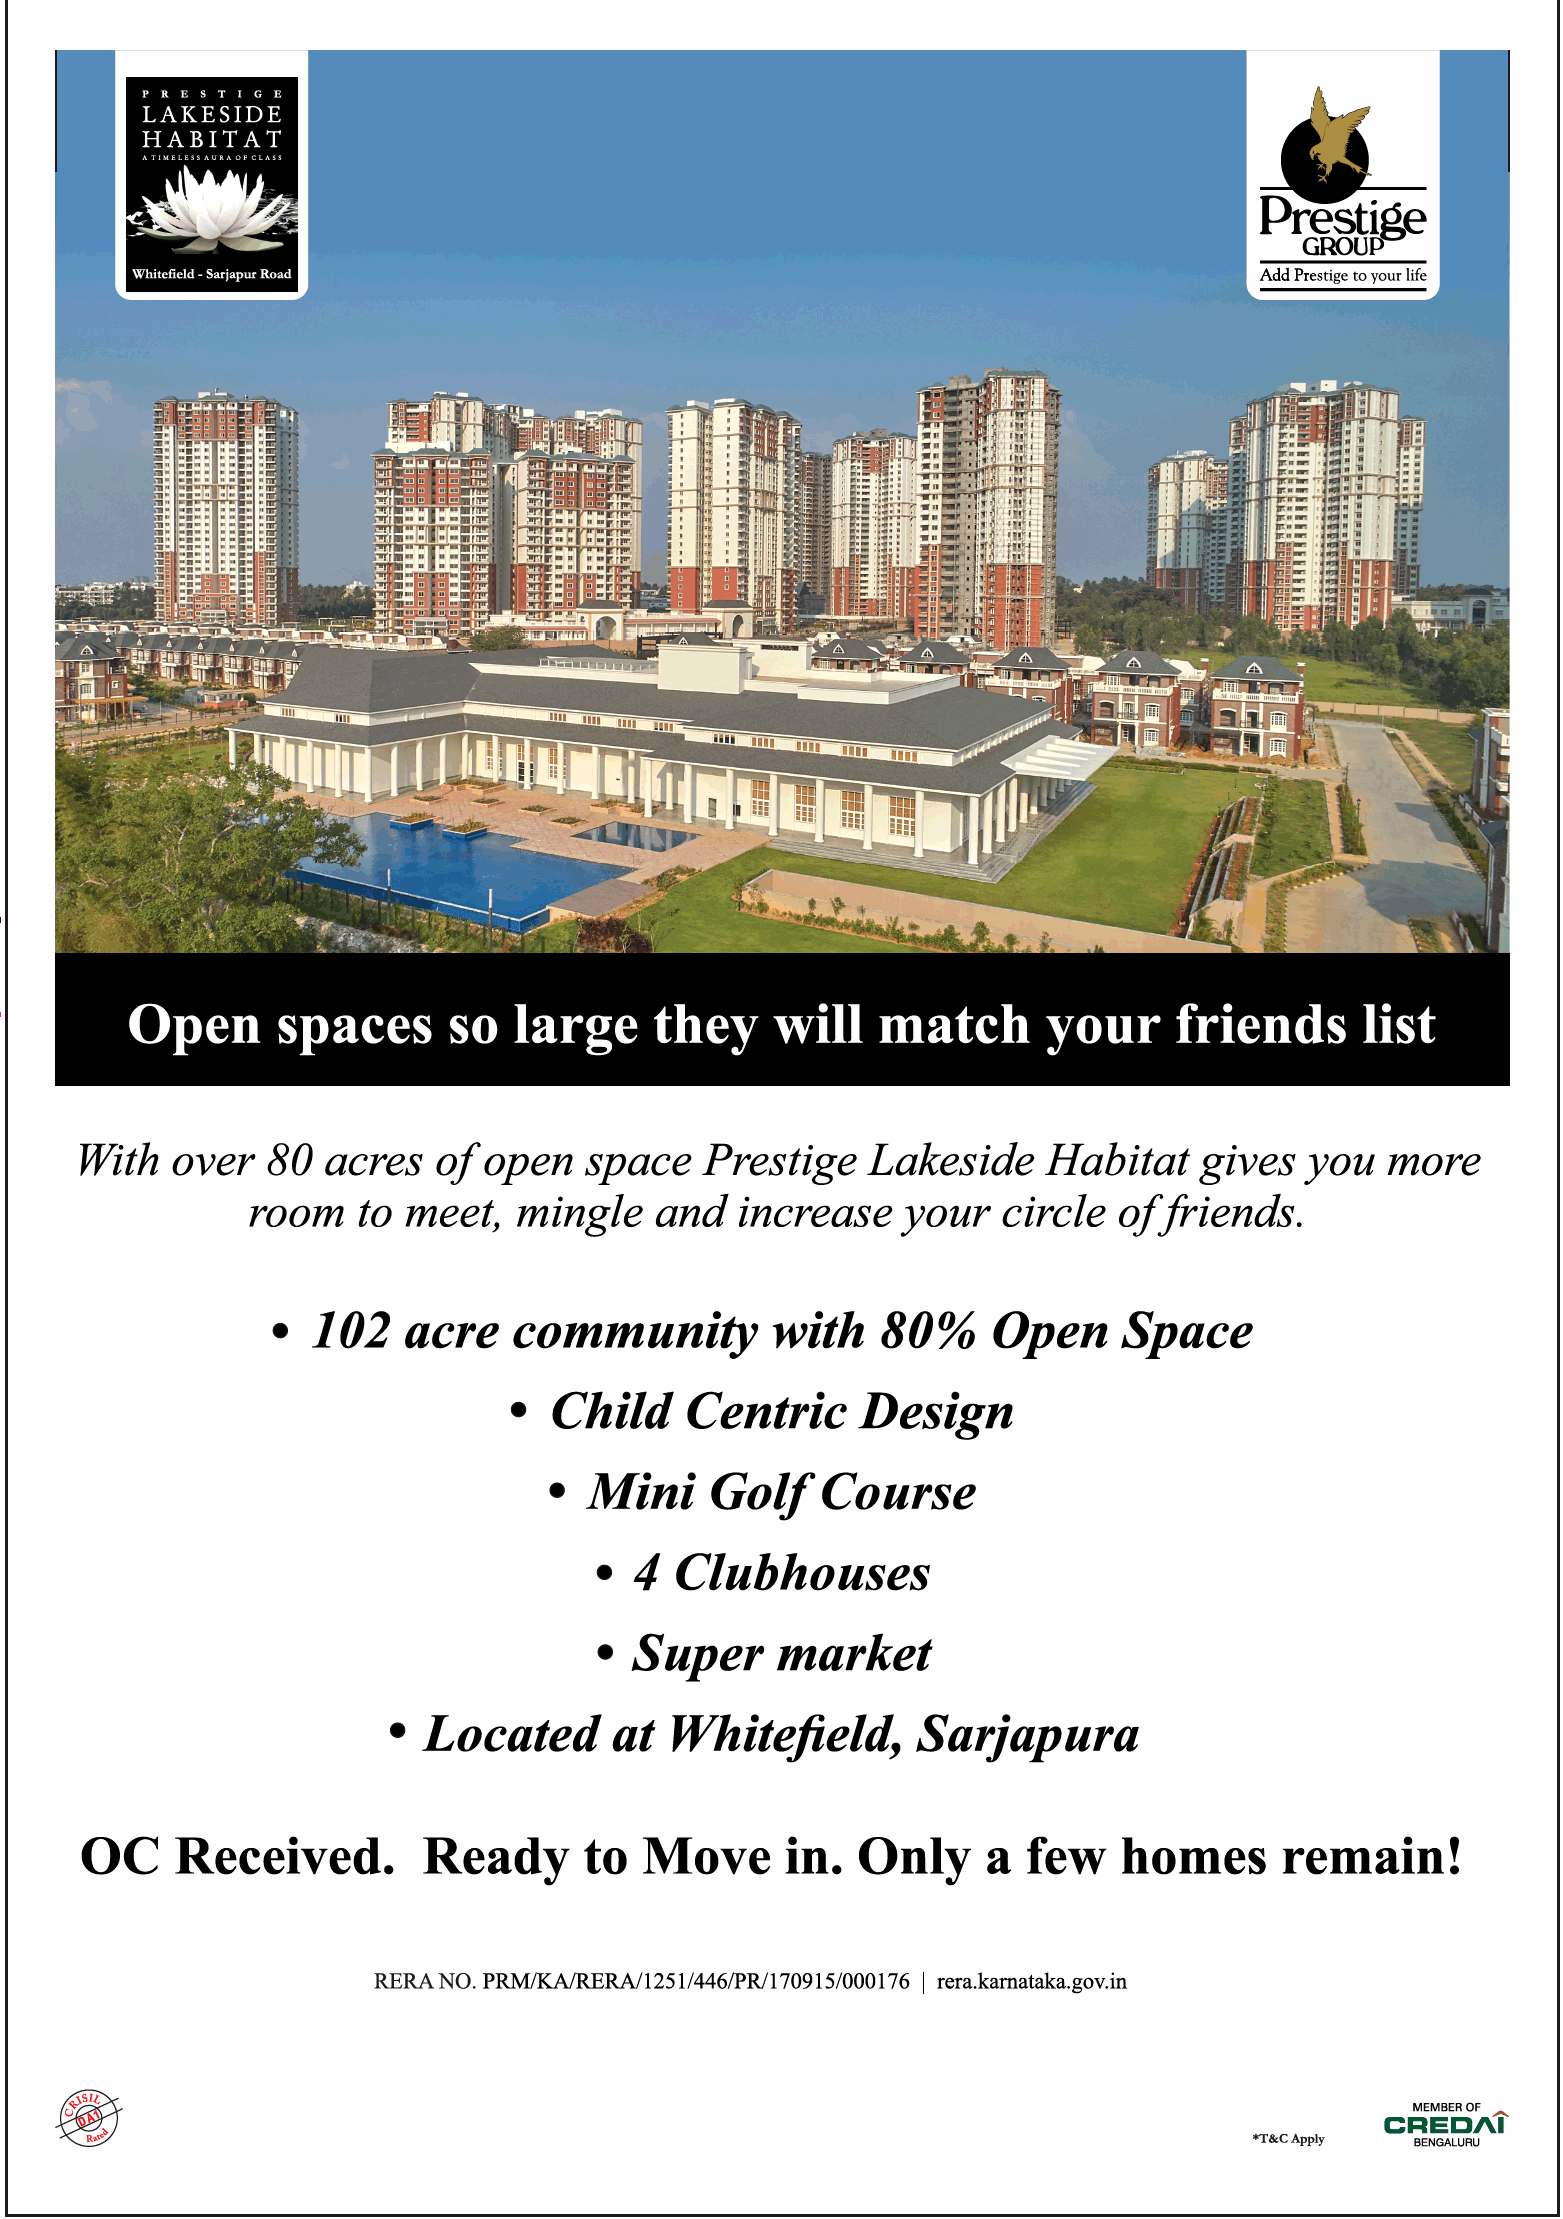 OC received, ready to move in, only a few homes remain at Prestige Lakeside Habitat, Bangalore